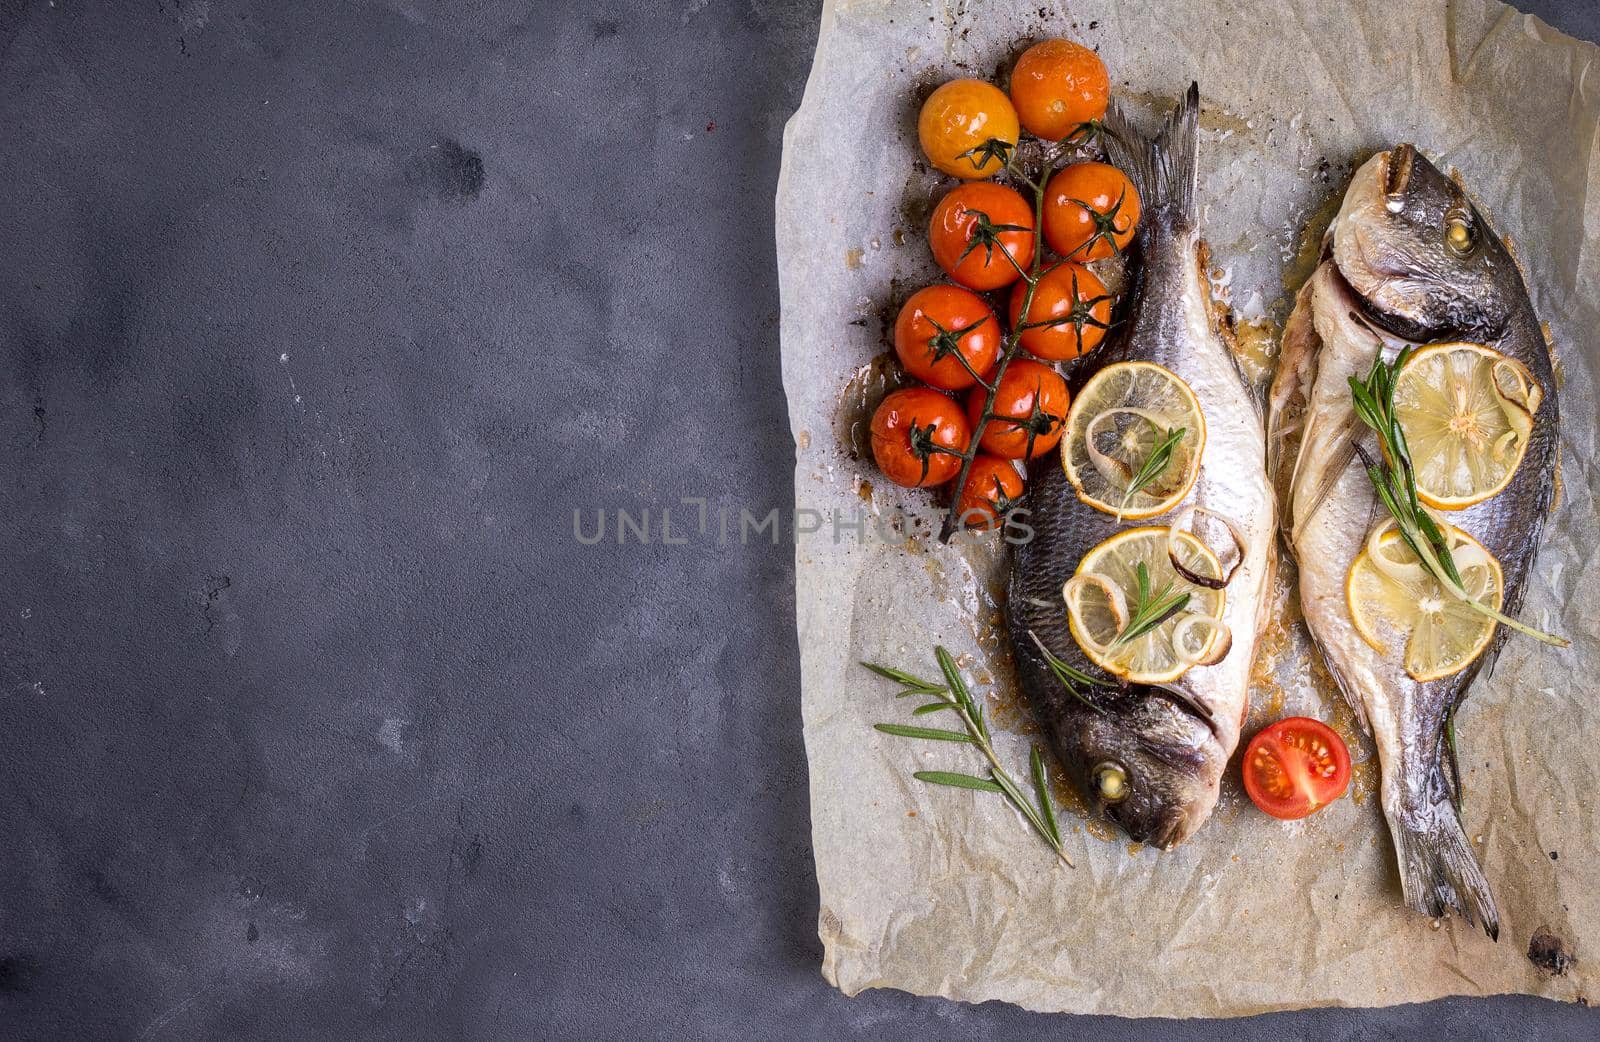 Baked fish background by its_al_dente